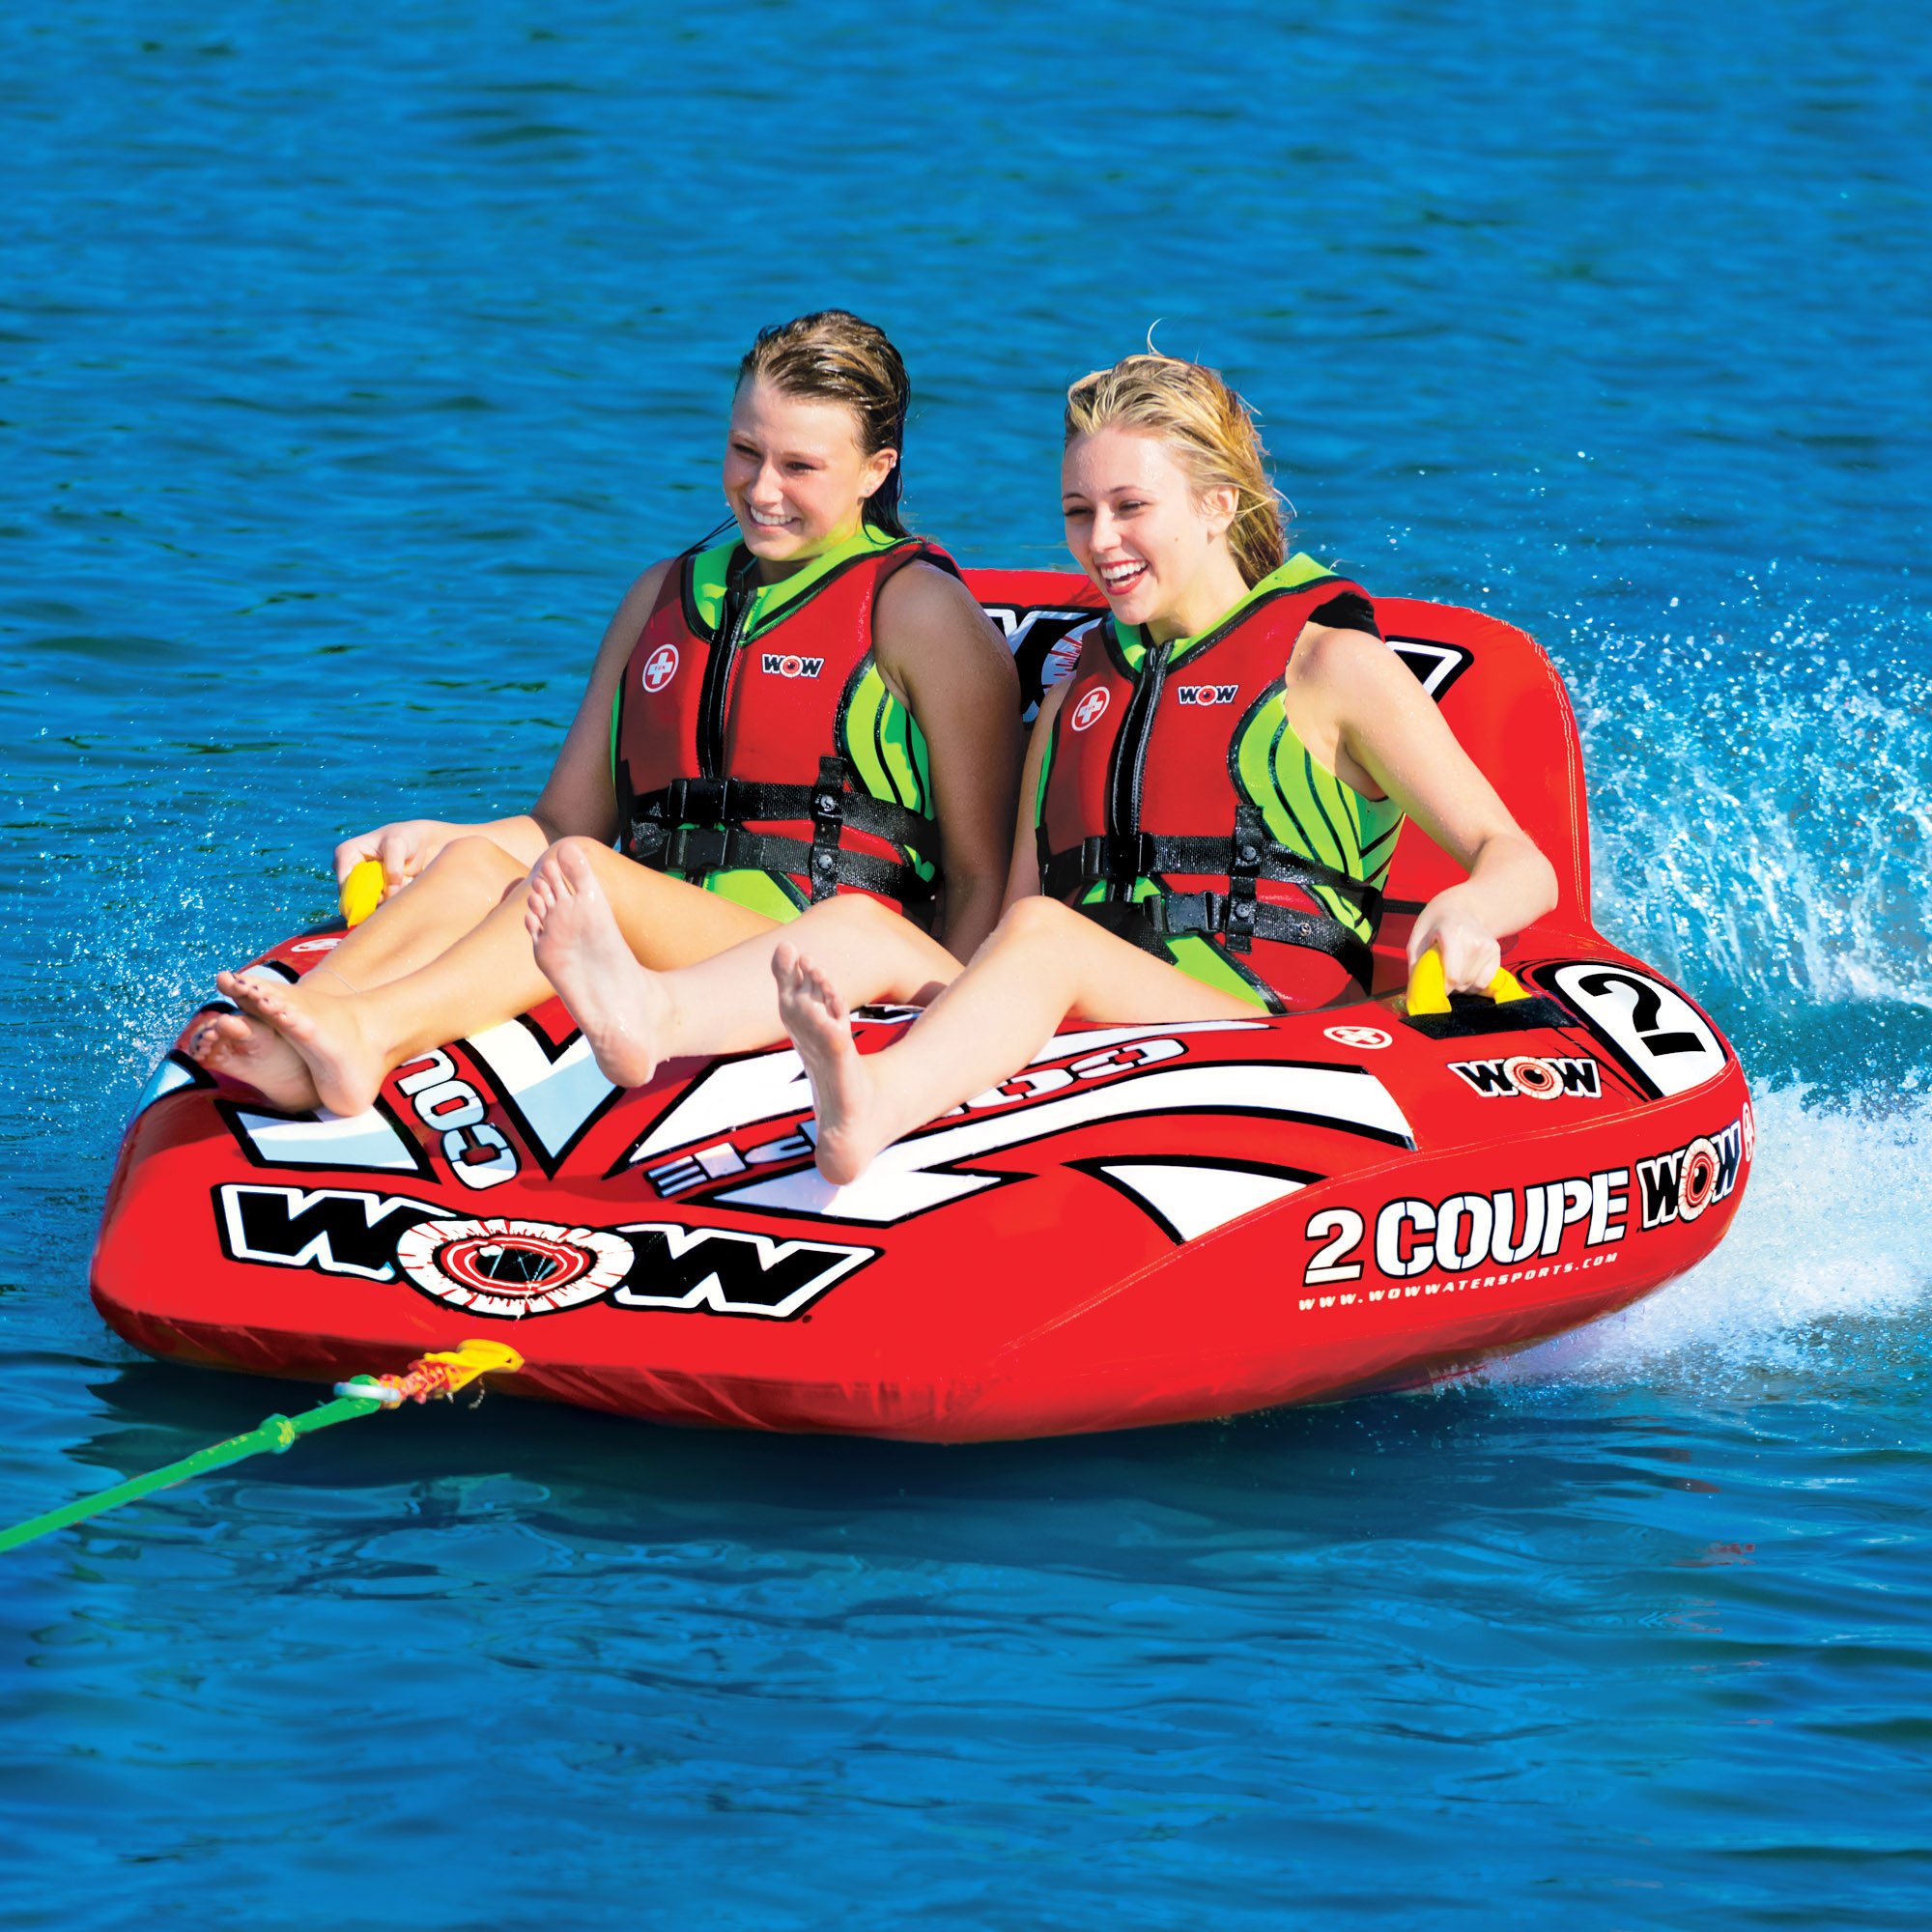 WOW World of Watersports Coupe Cockpit 1 or 2 Person Inflatable Towable Cockpit Tube for Boating, 15-1030